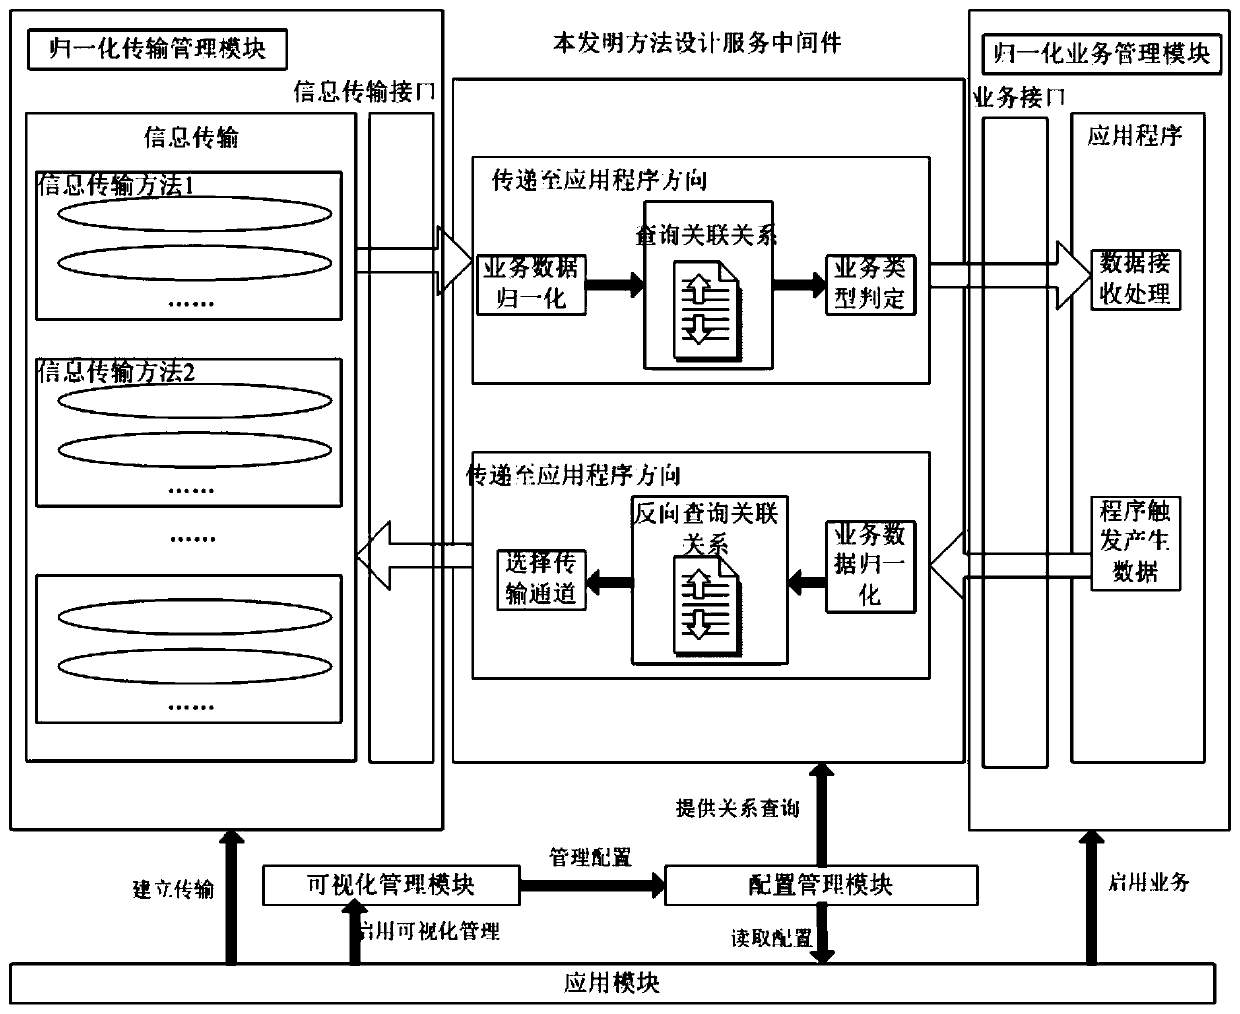 A visual multi-state information transmission service architecture design system